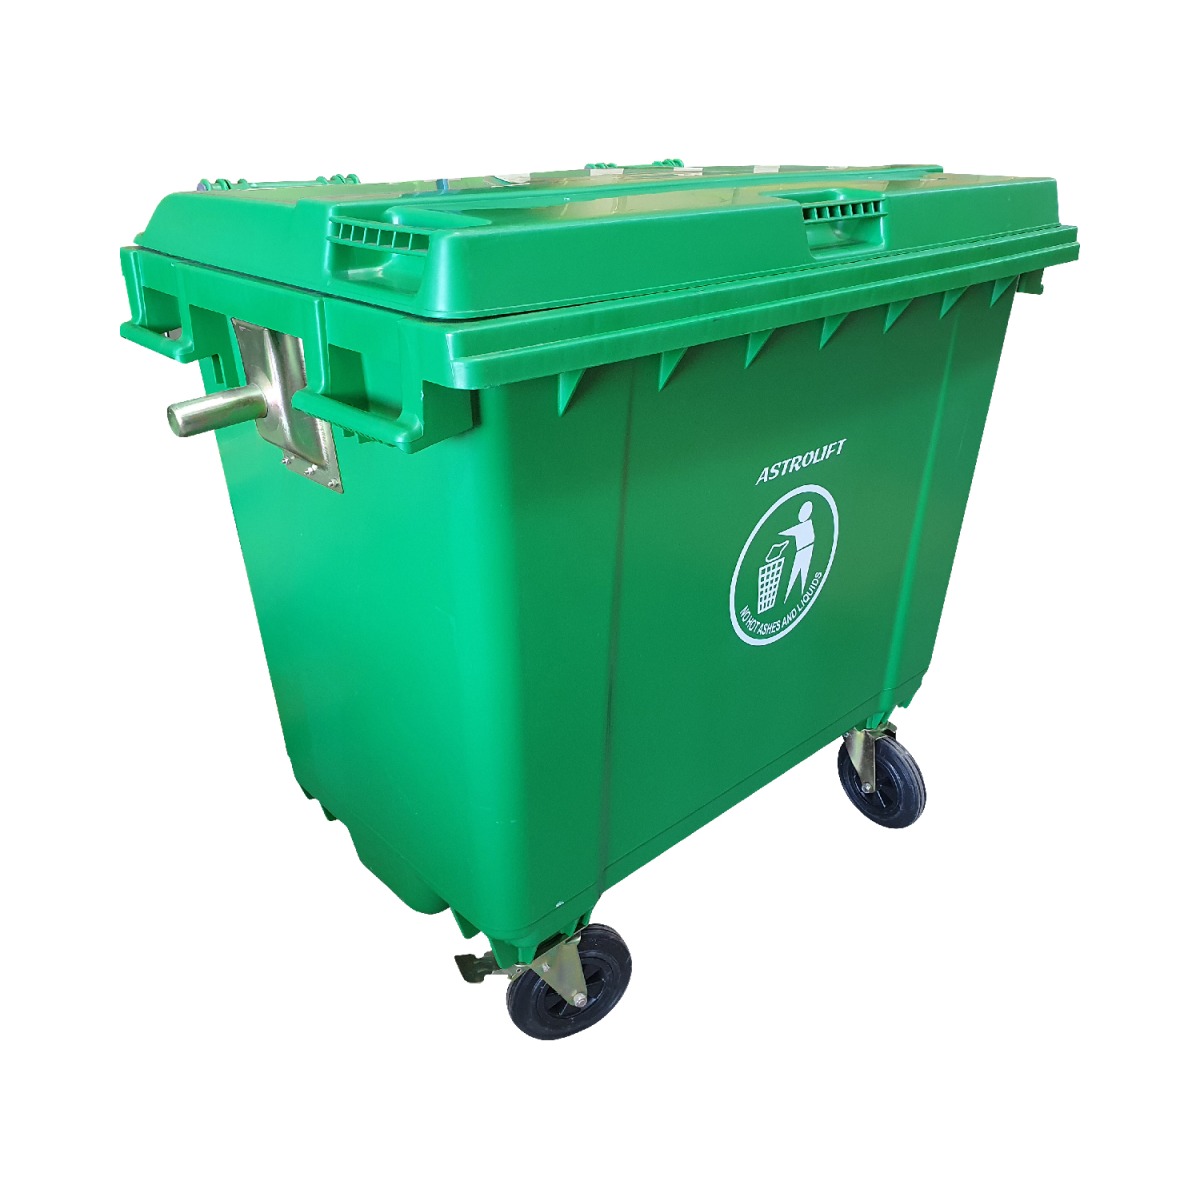 Buy 660L Flat Lid Bin Green in Waste Management  available at Astrolift NZ